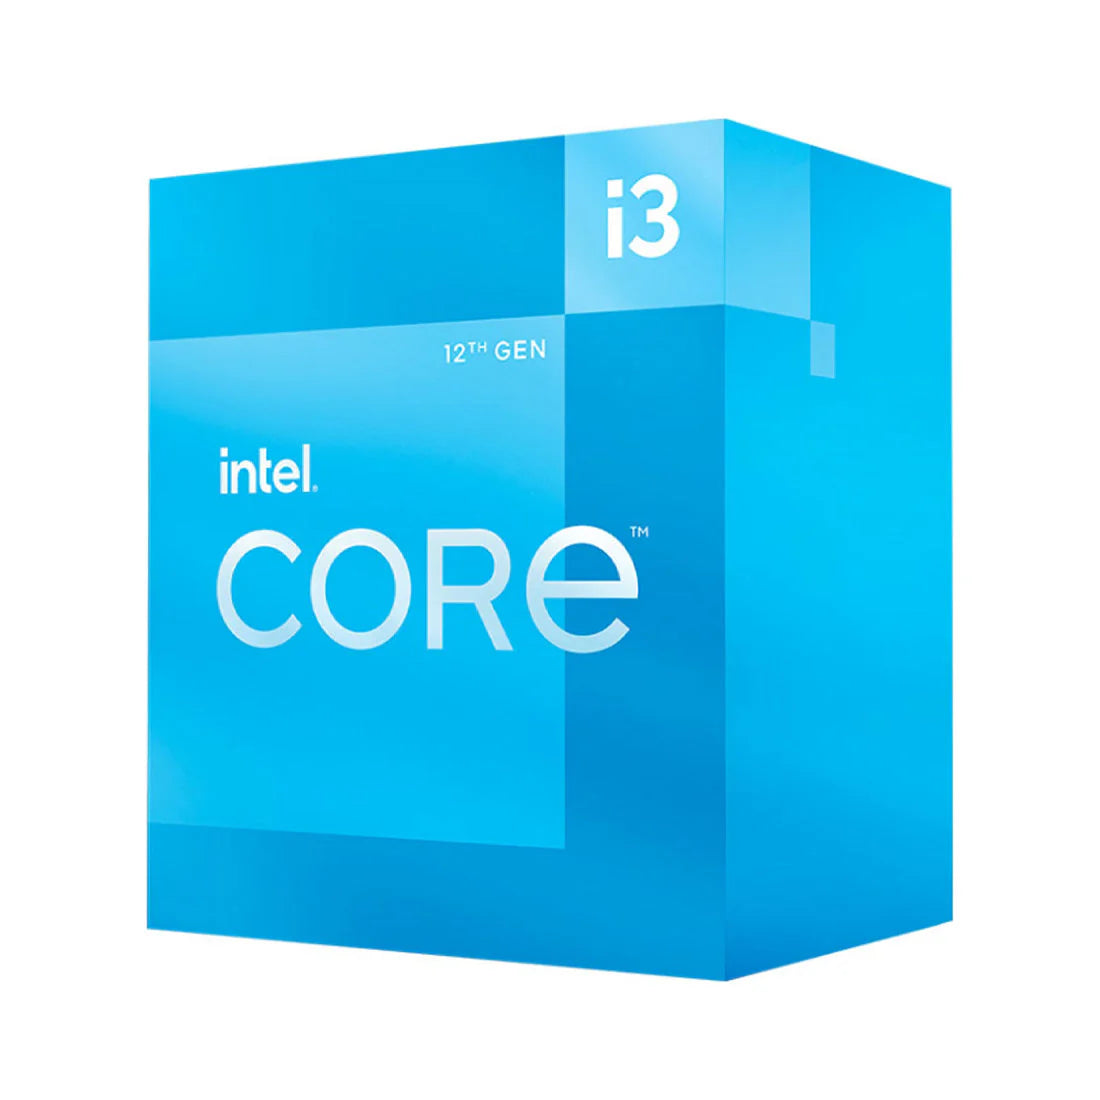 Intel Core i3-12100 Processor with 4 Cores, 8 Threads, and Intel UHD Graphics 730